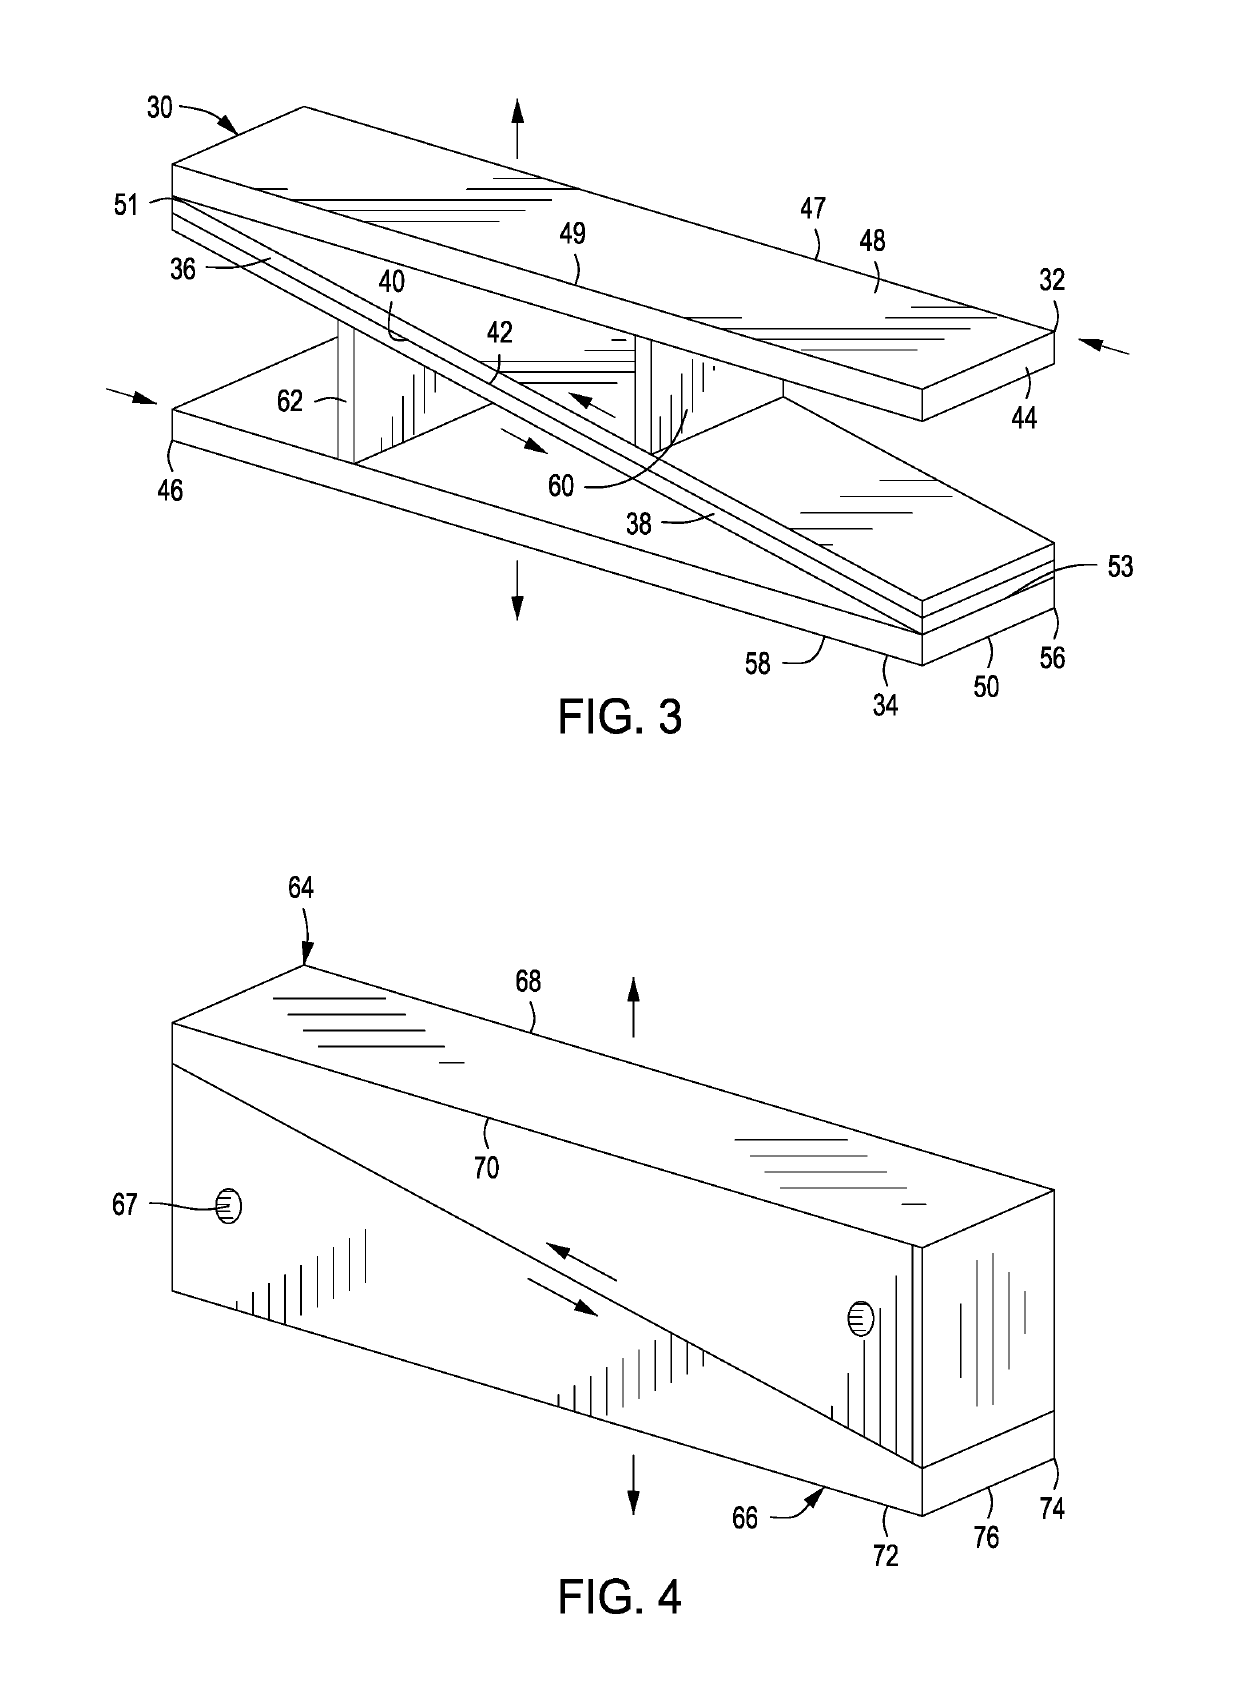 Method and apparatus for precision alignment and tack welding of weld-neck pipe fittings to pipe